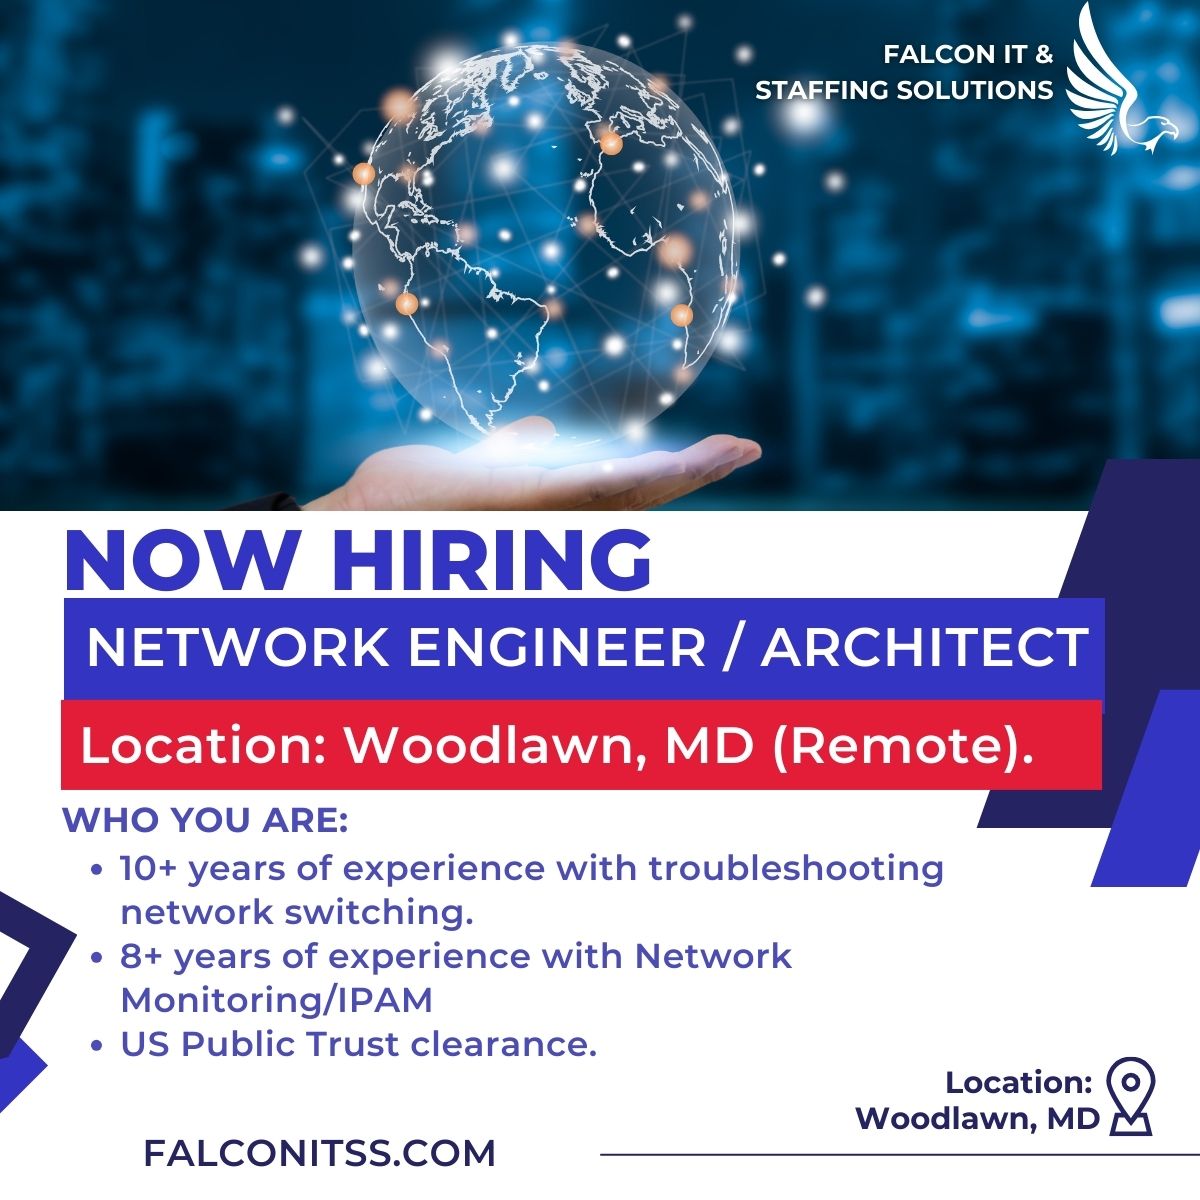 #HIRING 
✴️ ROLE: Network Engineer / Architect. 
📌 APPLY: bit.ly/4bpQLRZ
📍Woodlawn, MD (Remote temporary).
📧 recruiters@falconitss.com

@falconitss
#NetworkEngineer #governmentcontracting #governmentjobs